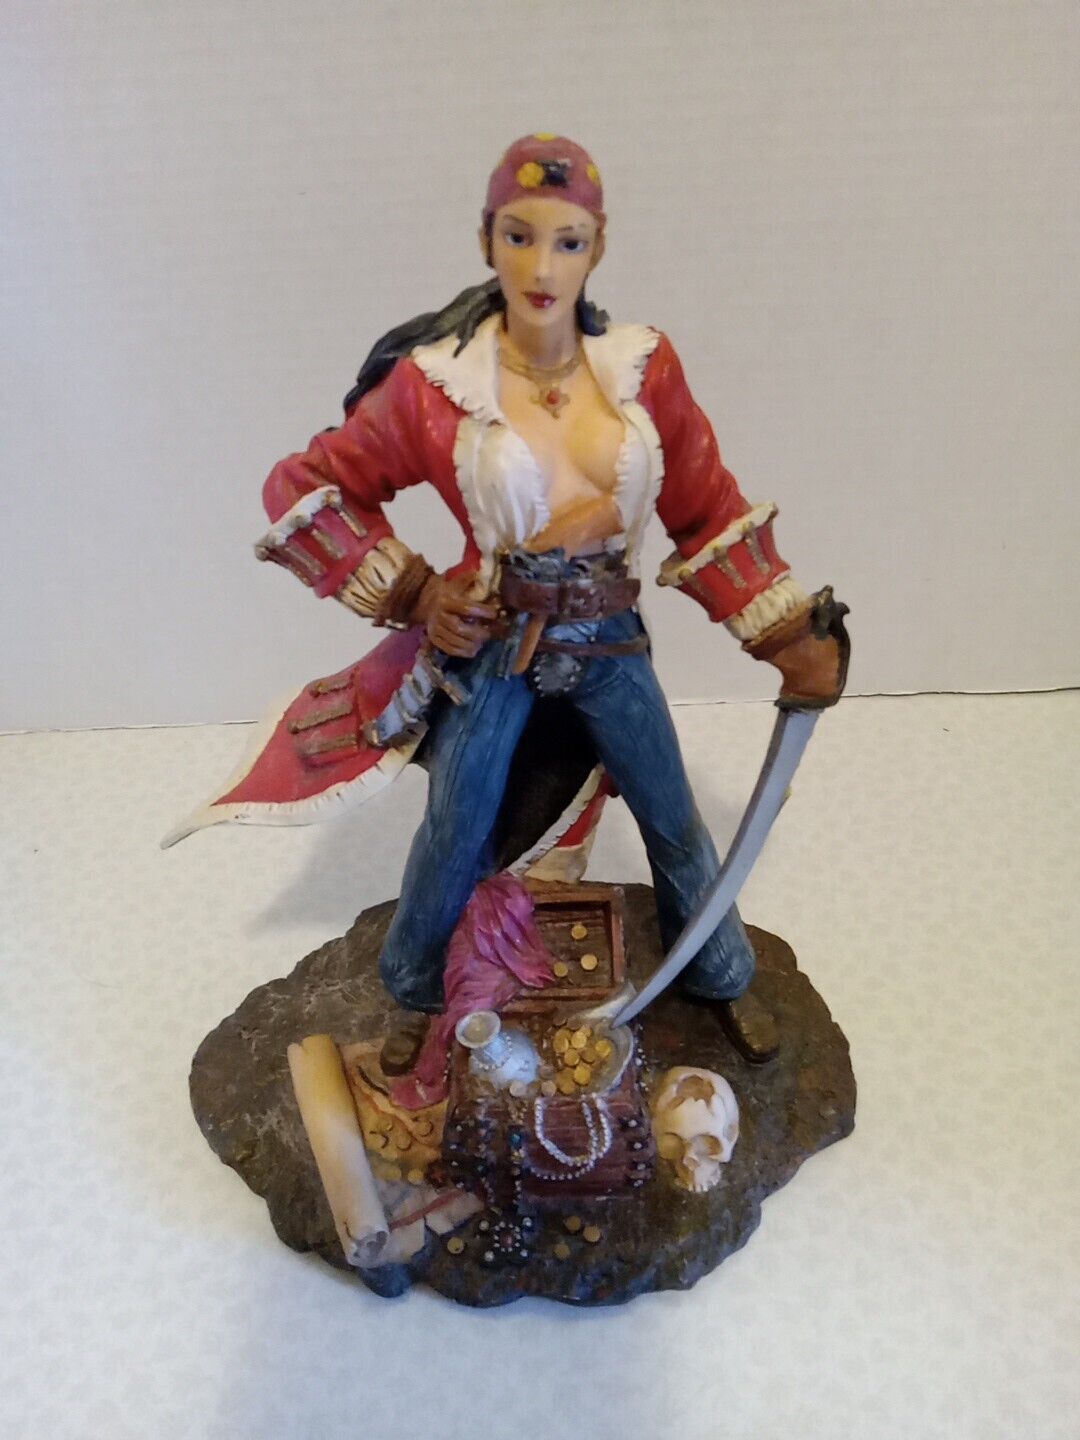 Summit Collection Myth & Legends Woman Pirate / Treasure Chest Statue 10”